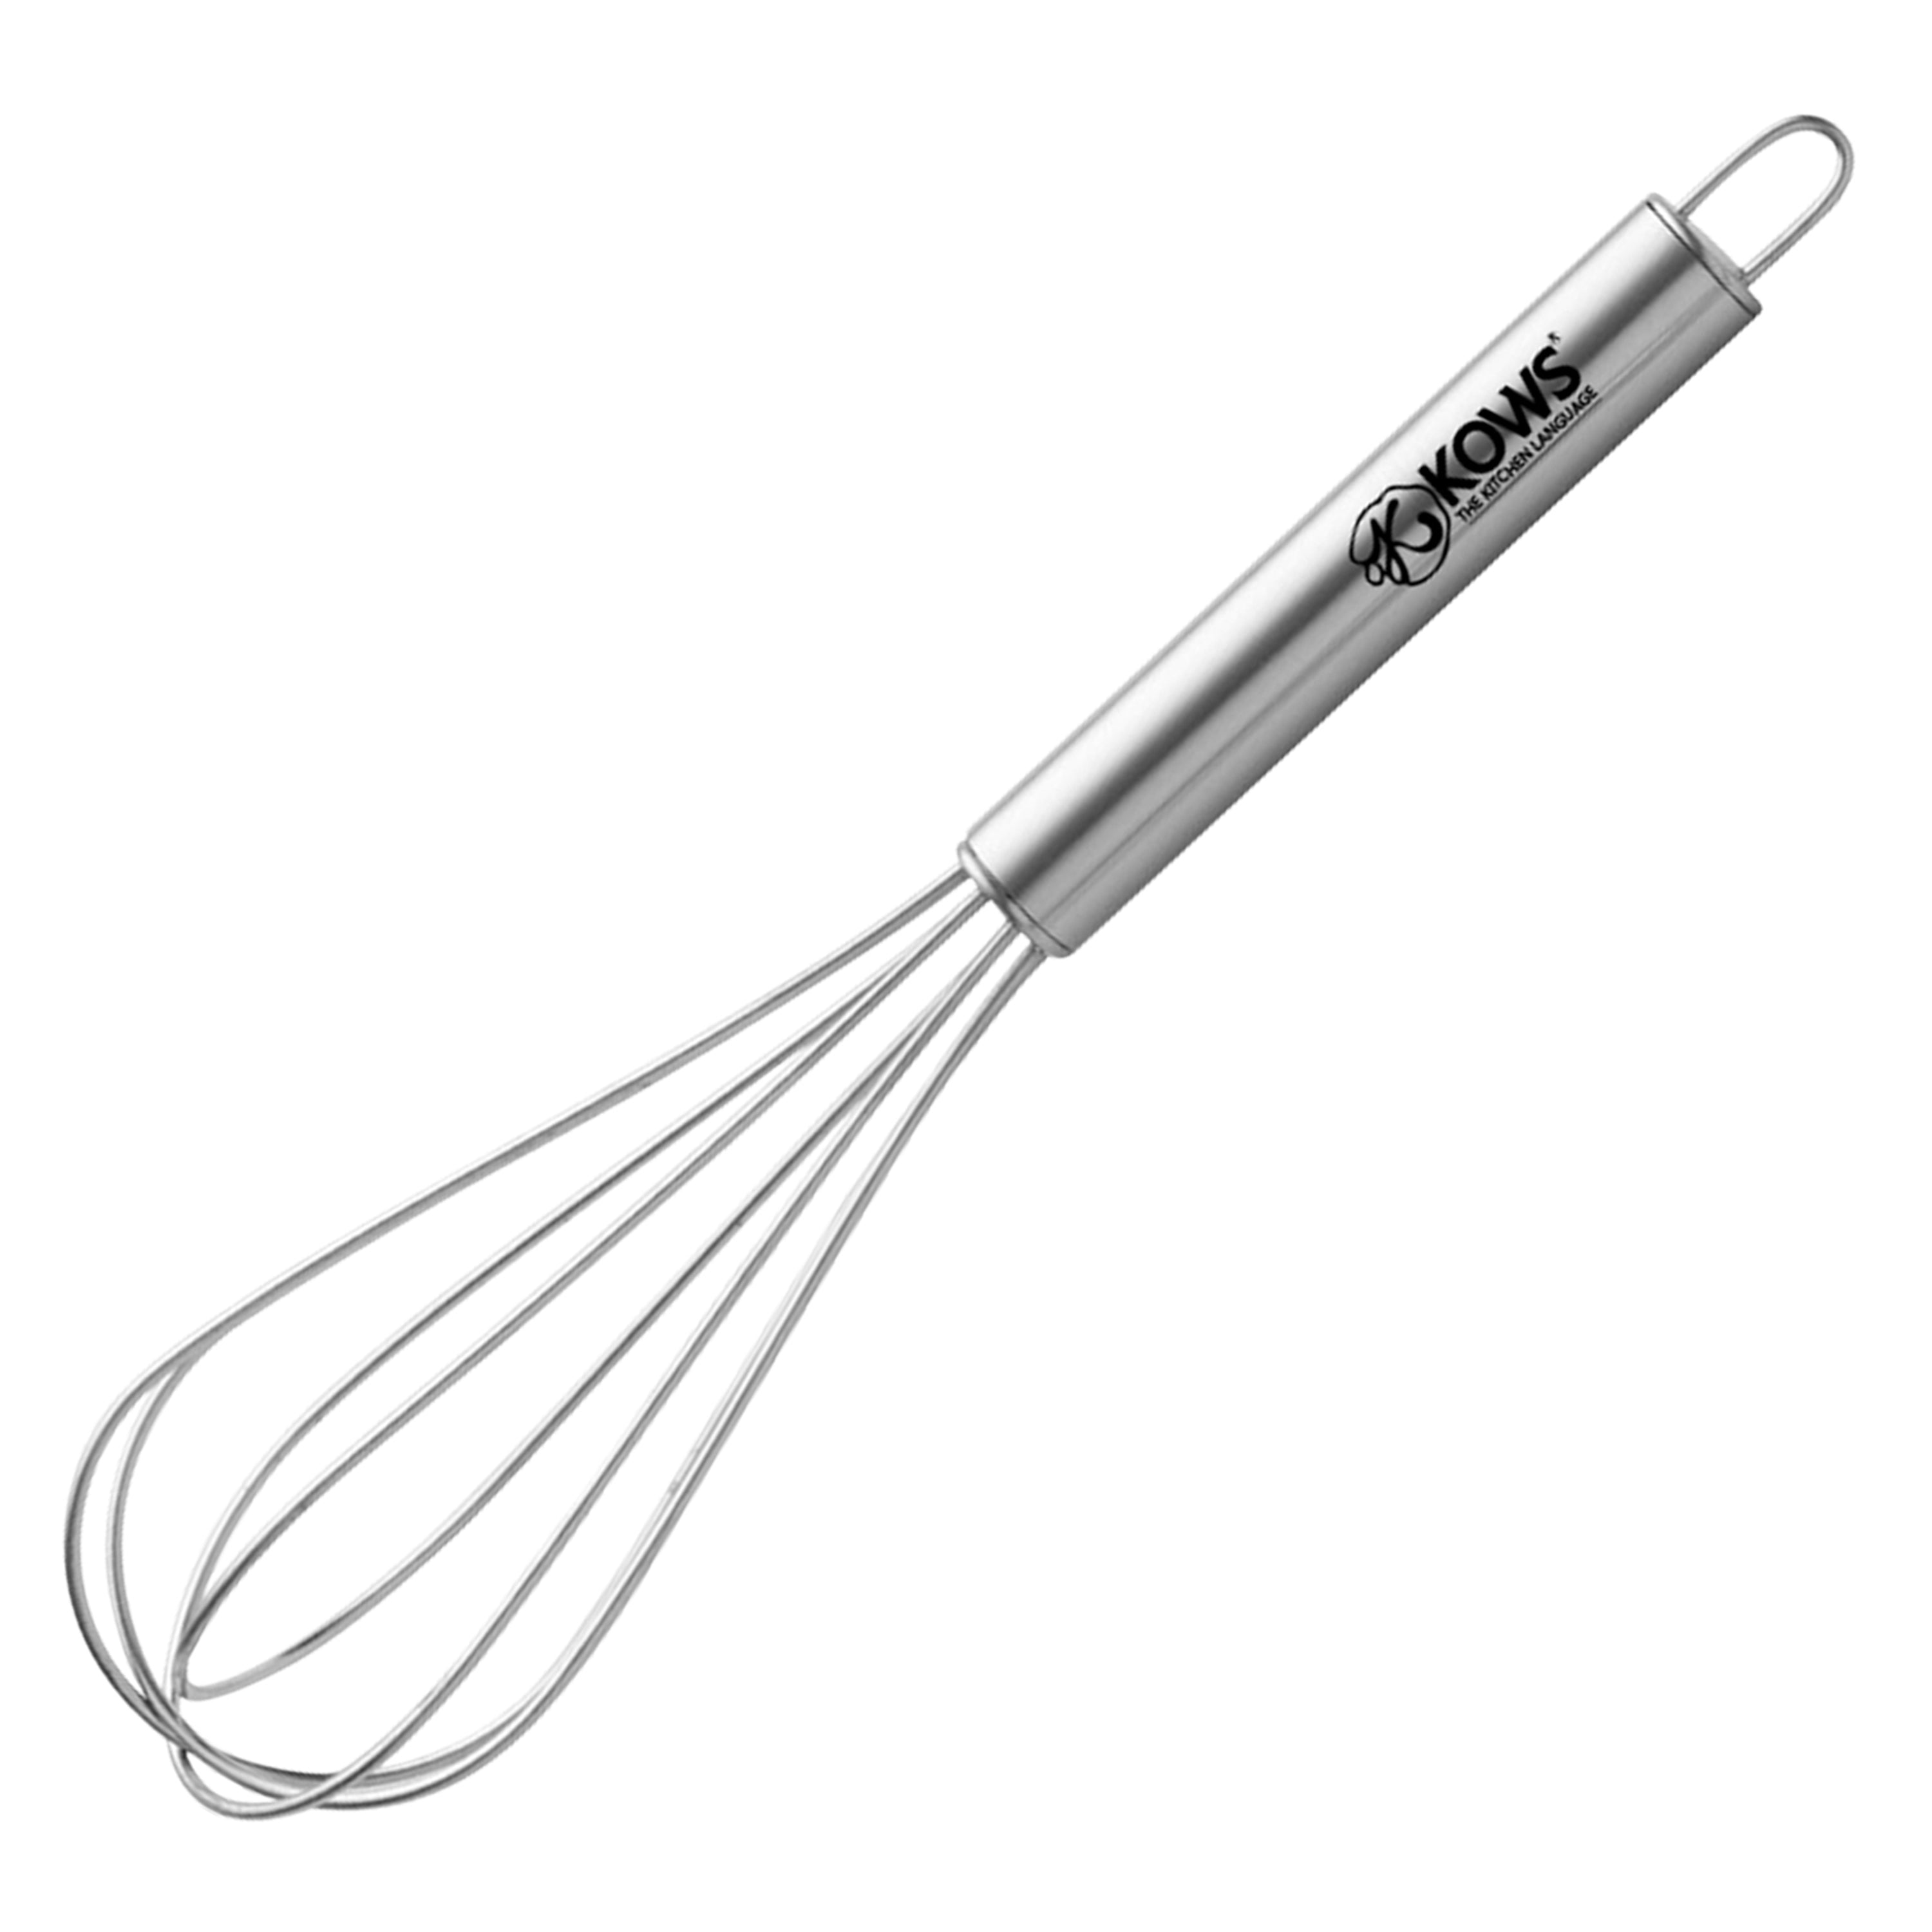 KOWS Pipe handle 1.4mm whisk 15 cm (WK004)